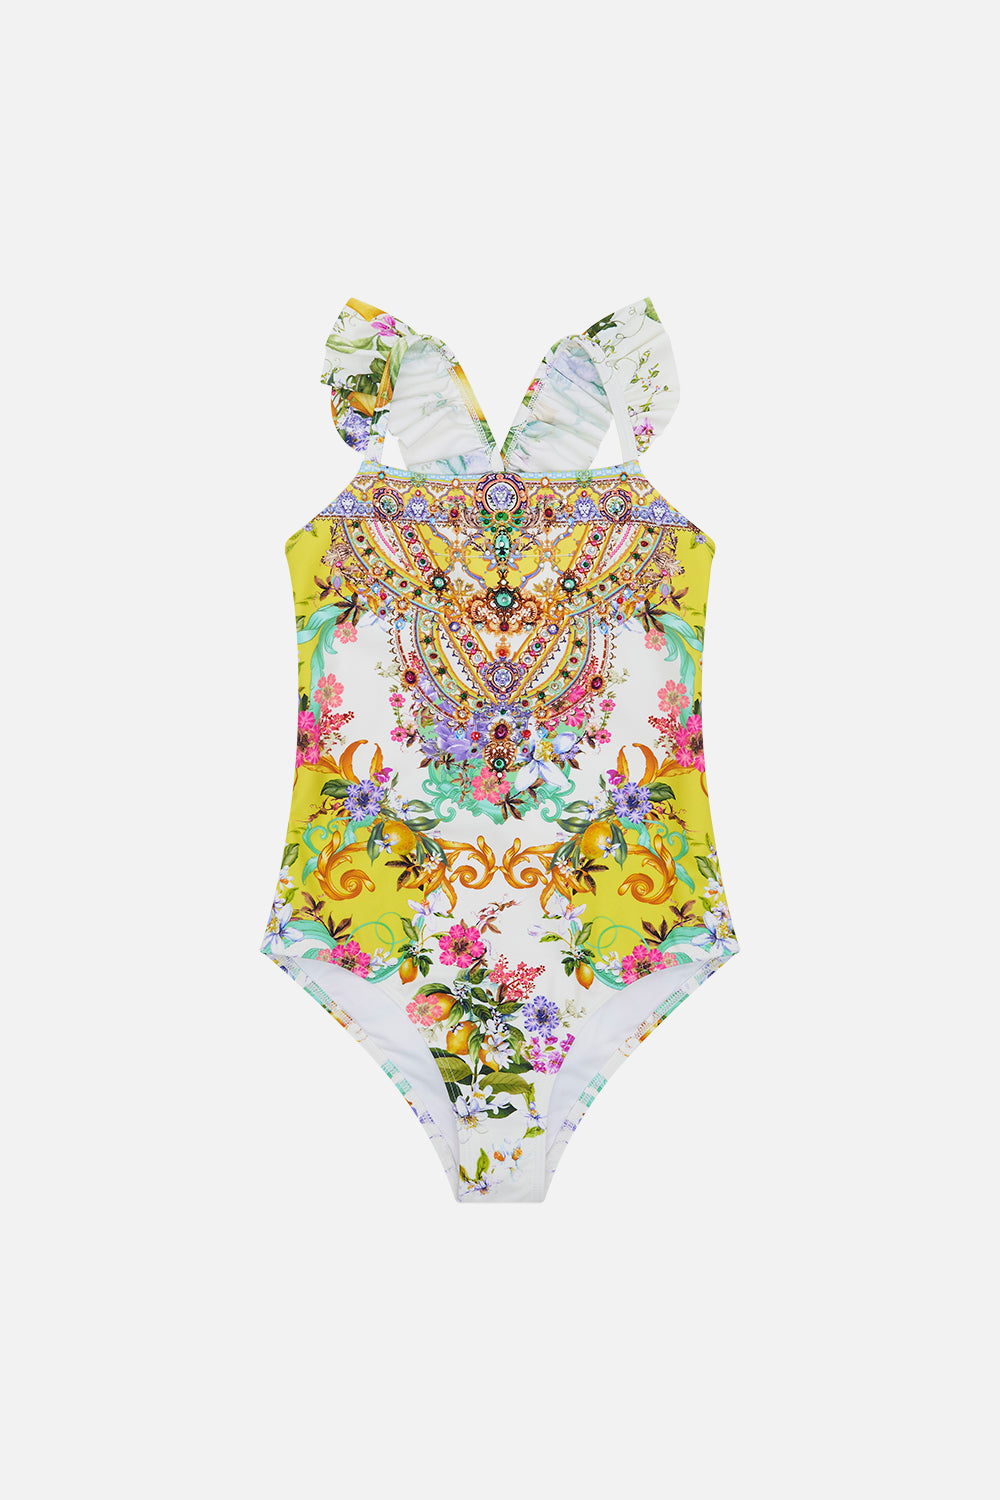 Product view of MILLA BY CAMILLA kids one piece swimsuit in Caterina Spritz print